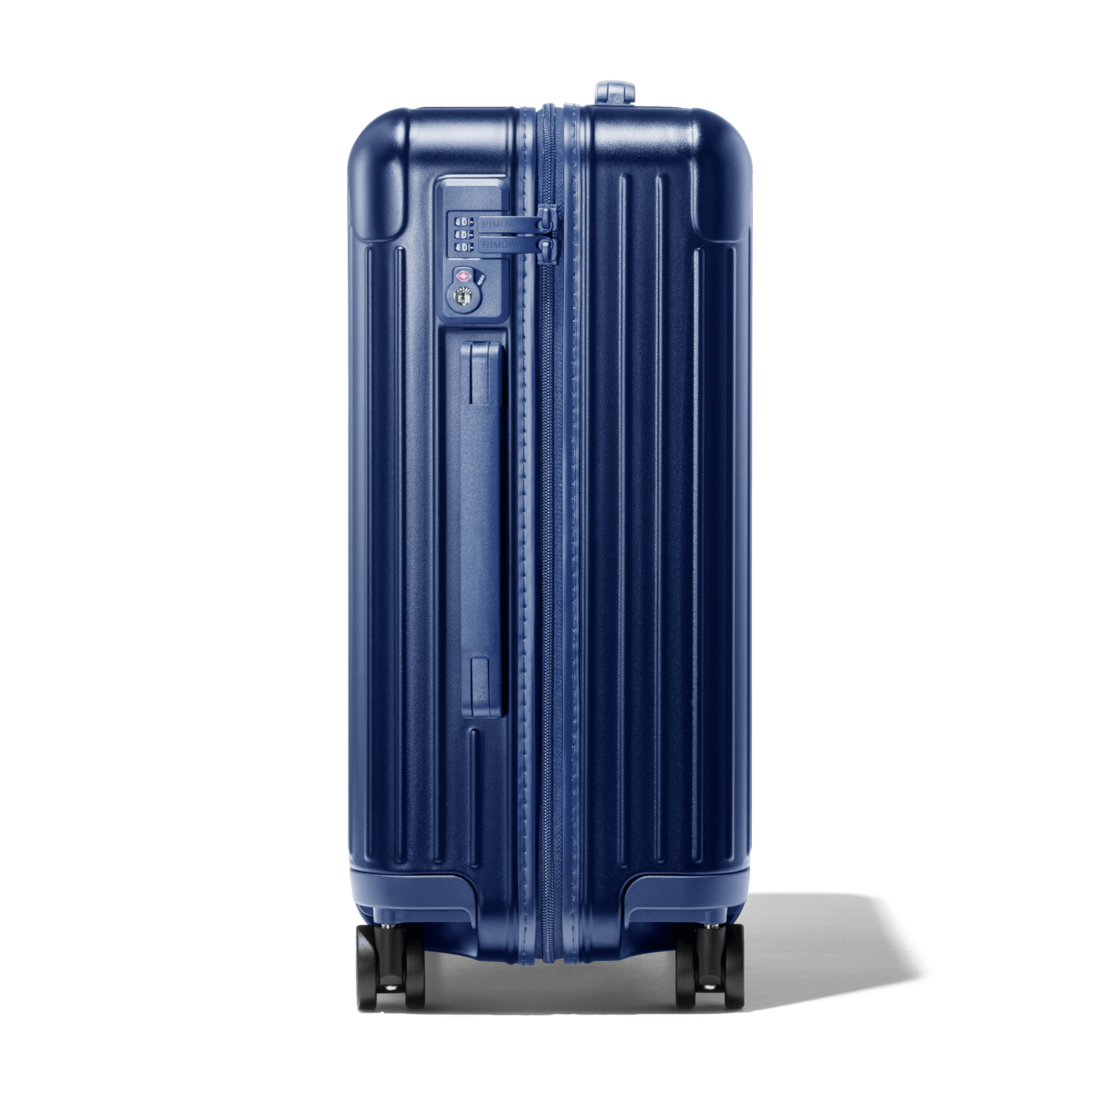 Rimowa Essential Cabin 21.7 Carry-On Luggage